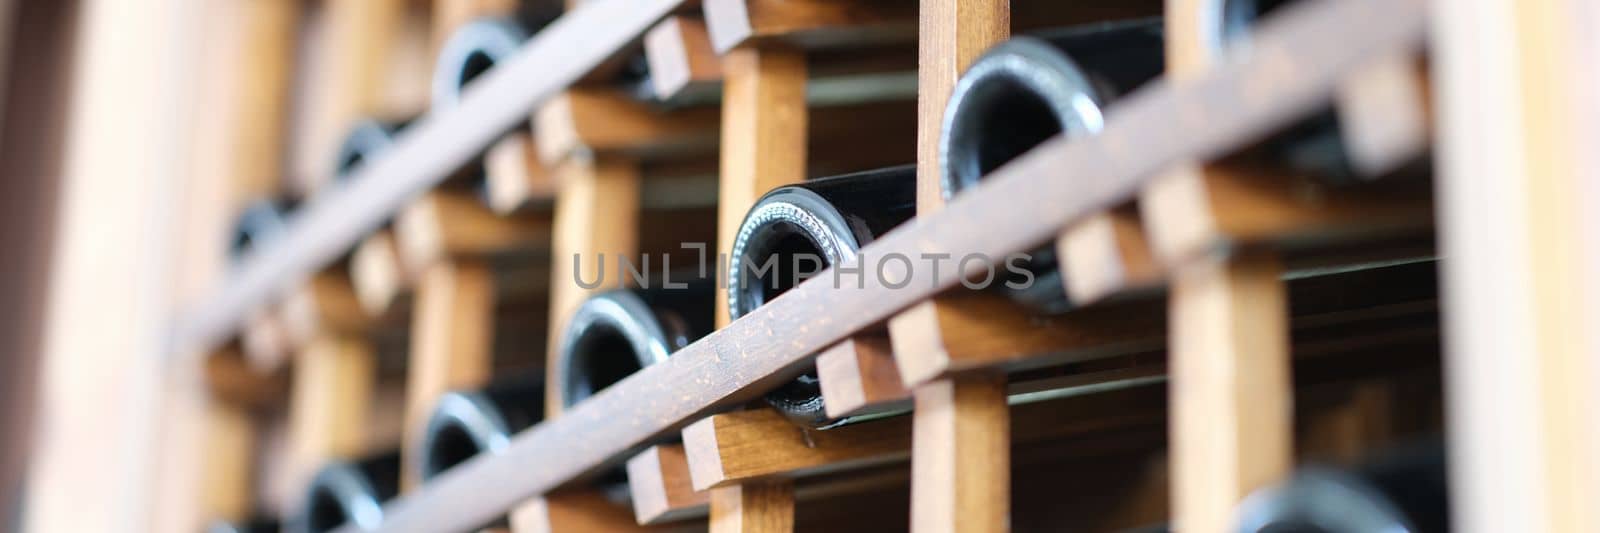 Many wine bottles in wine cellar closeup. Premium alcohol in store concept